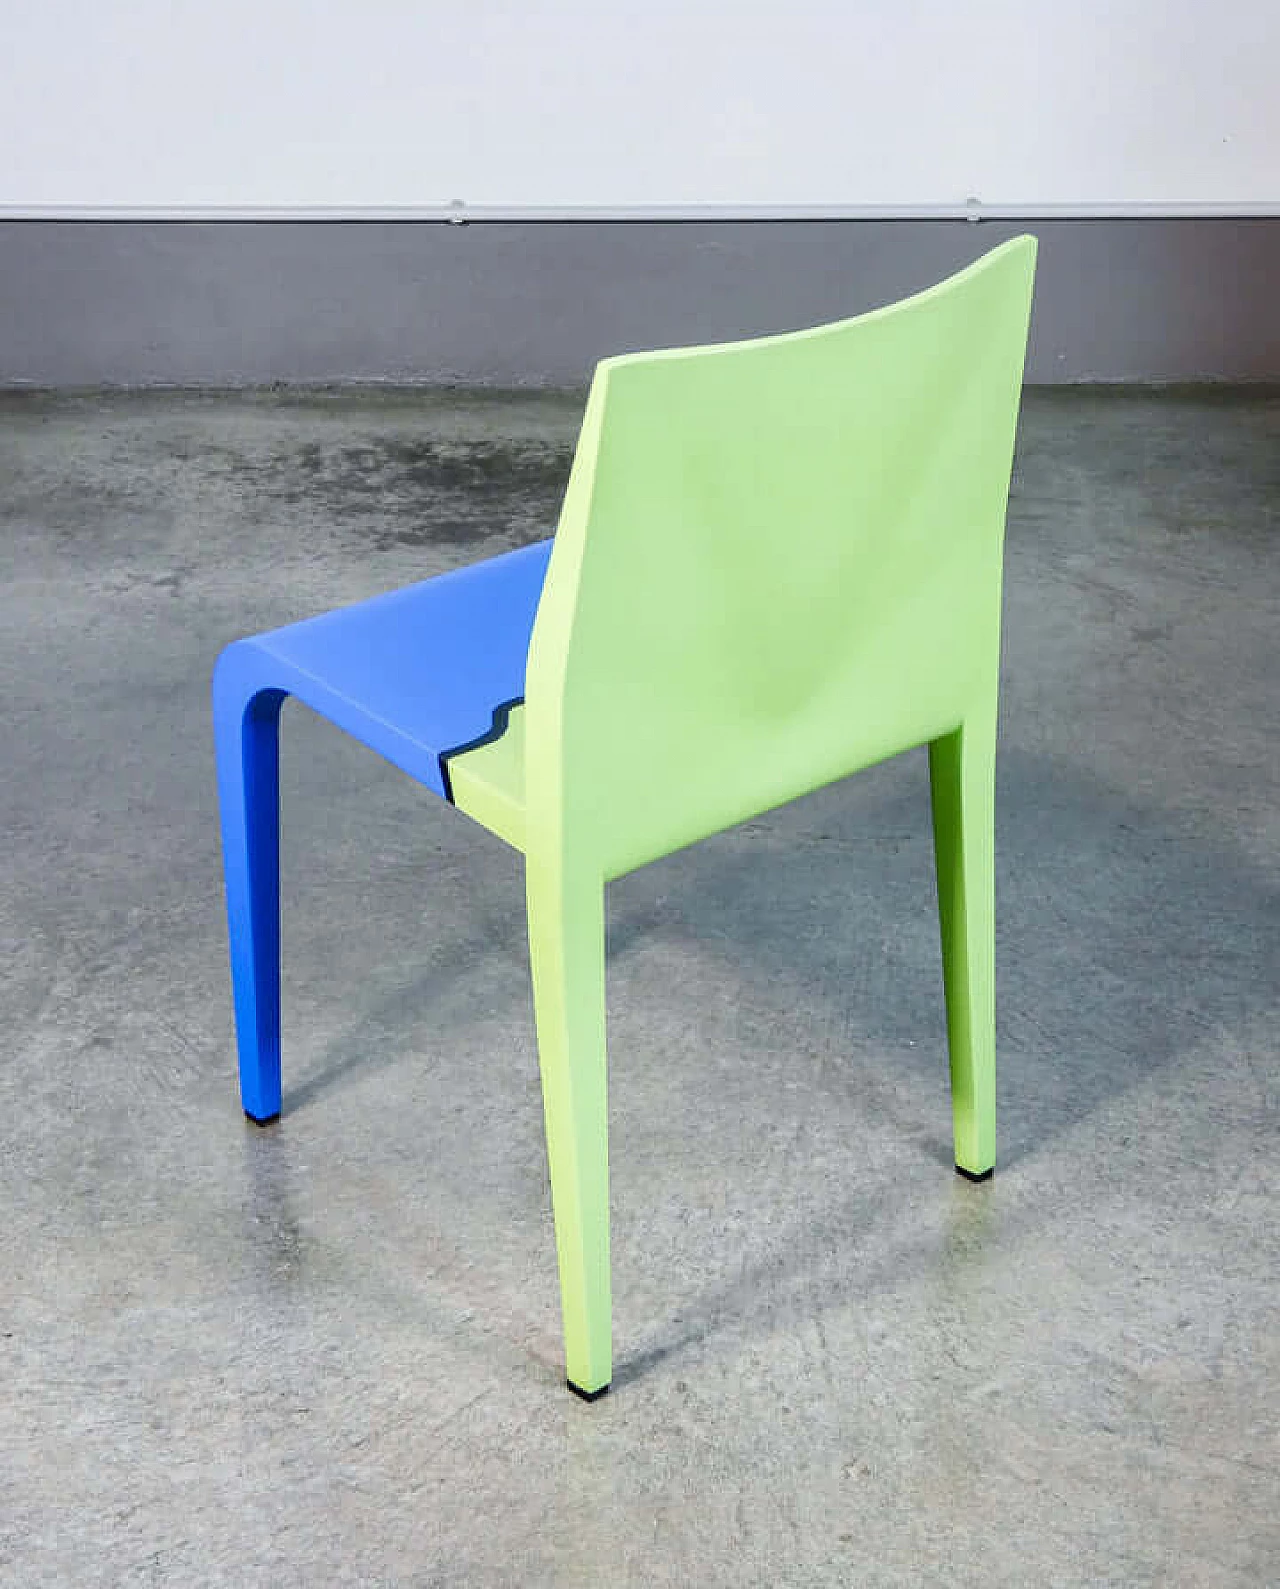 Laleggera 44 chair by Riccardo Blumer for Alias painted by Michelangelo Pistoletto, 2009 6